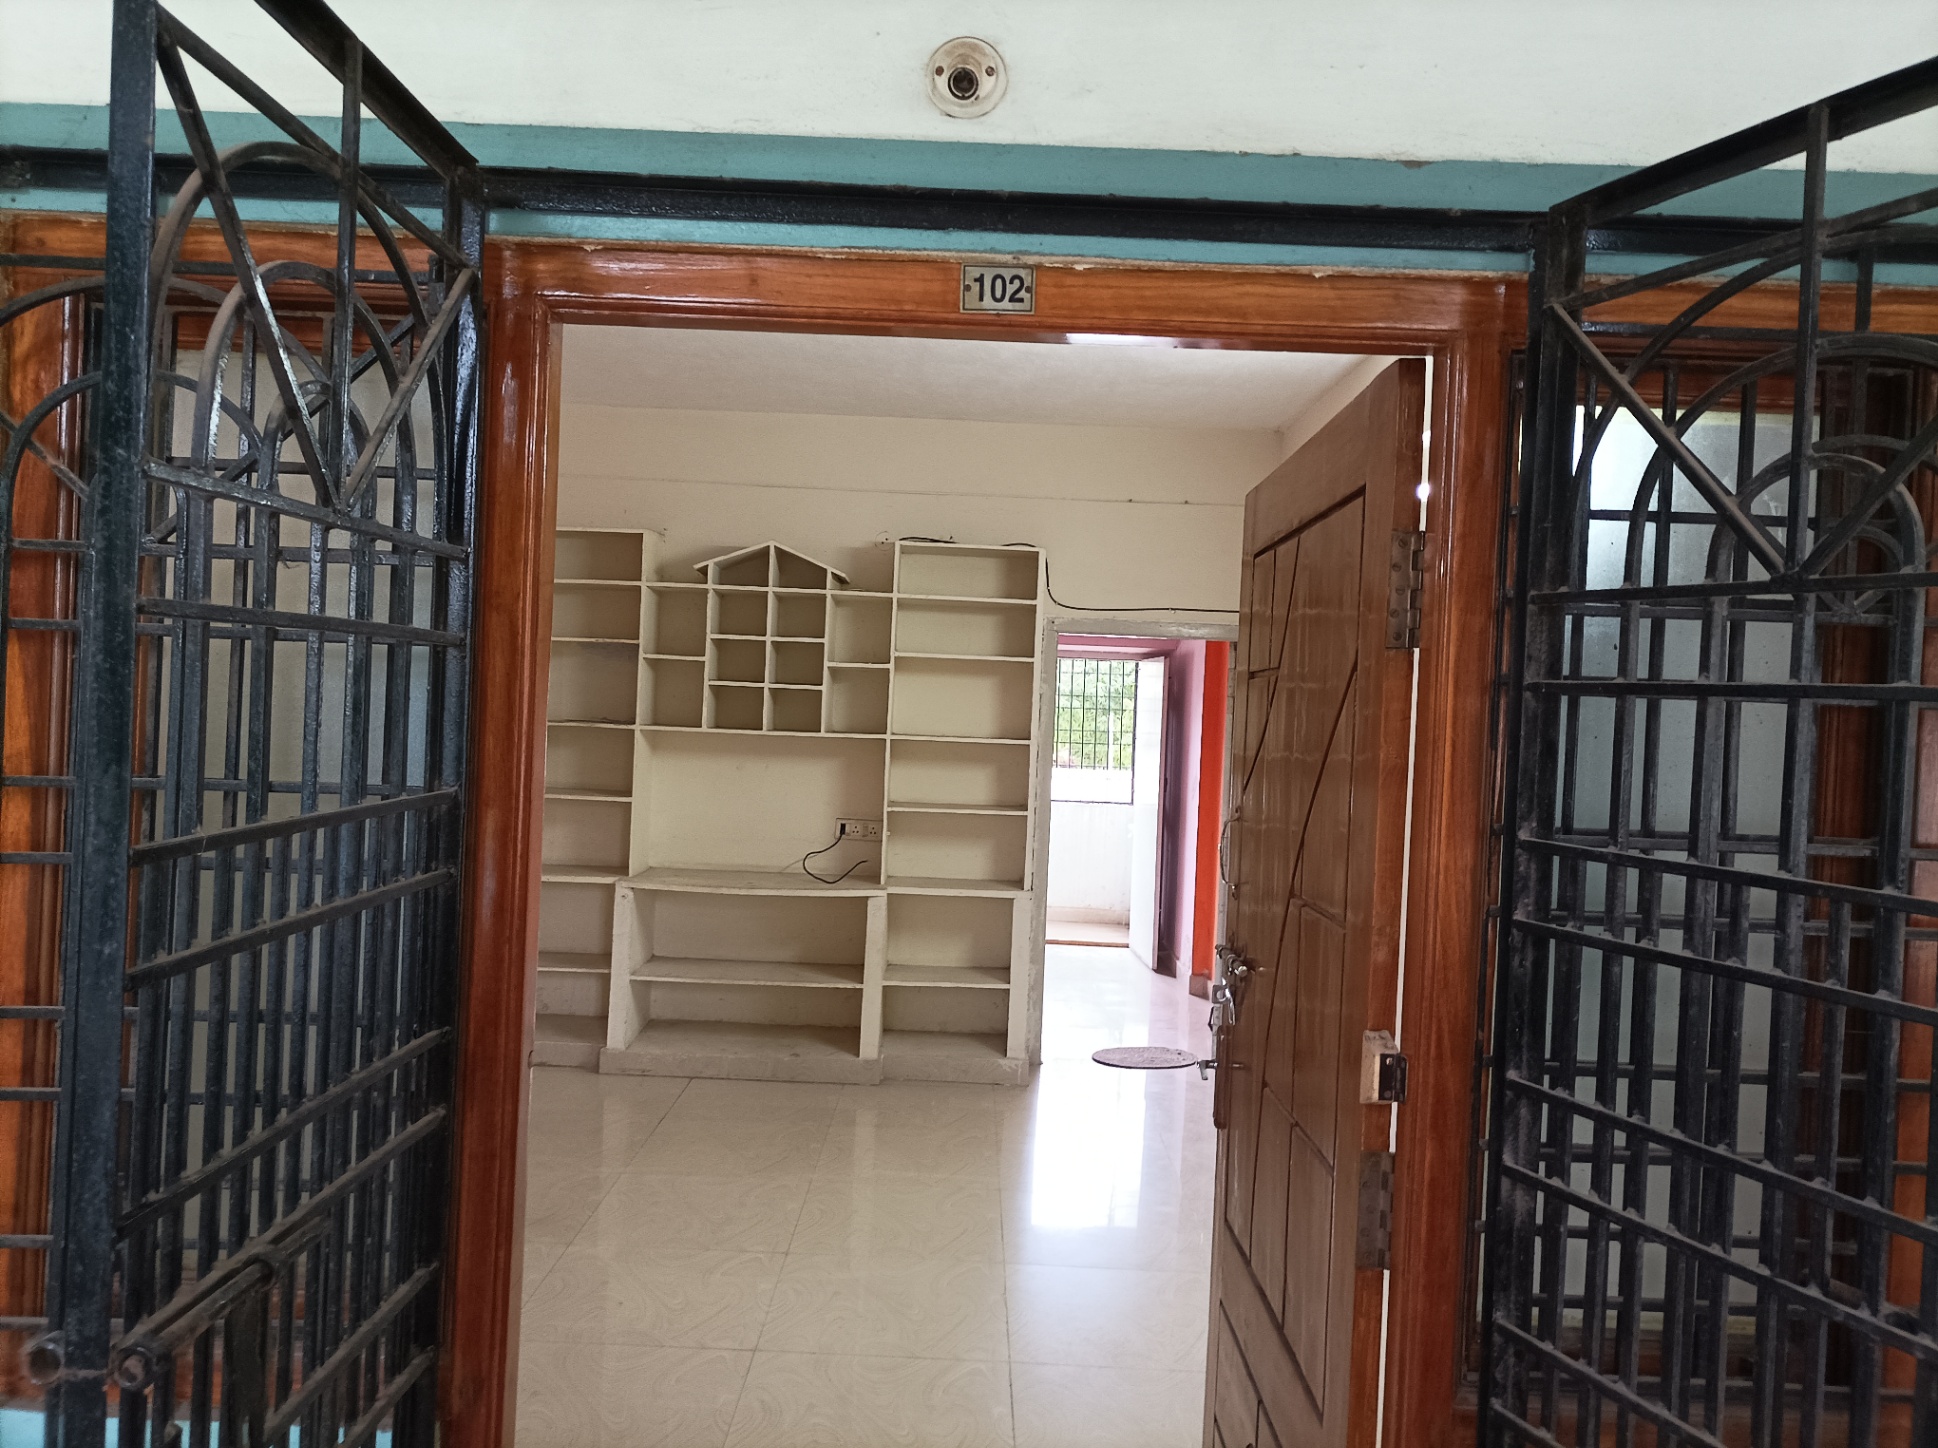 2 Bed/ 2 Bath Apartment/ Flat; 1,180 sq. ft. carpet area, Semi Furnished for rent @Car shed junction 